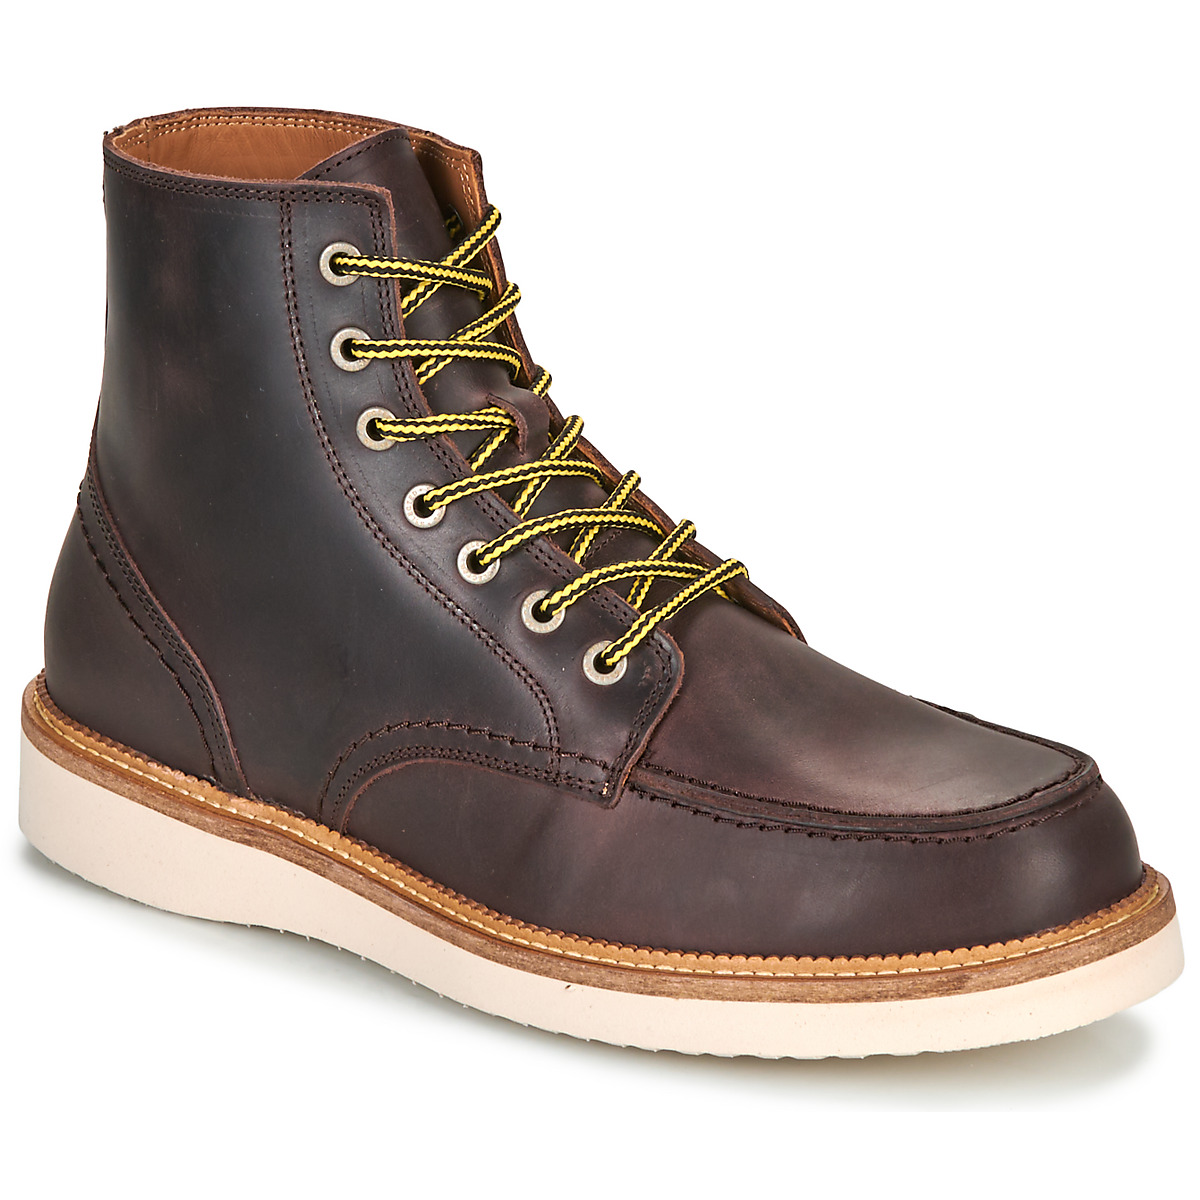 Selected MArron SLHTEO NEW LEATHER MOC-TOE BOOT t2GUyVuF